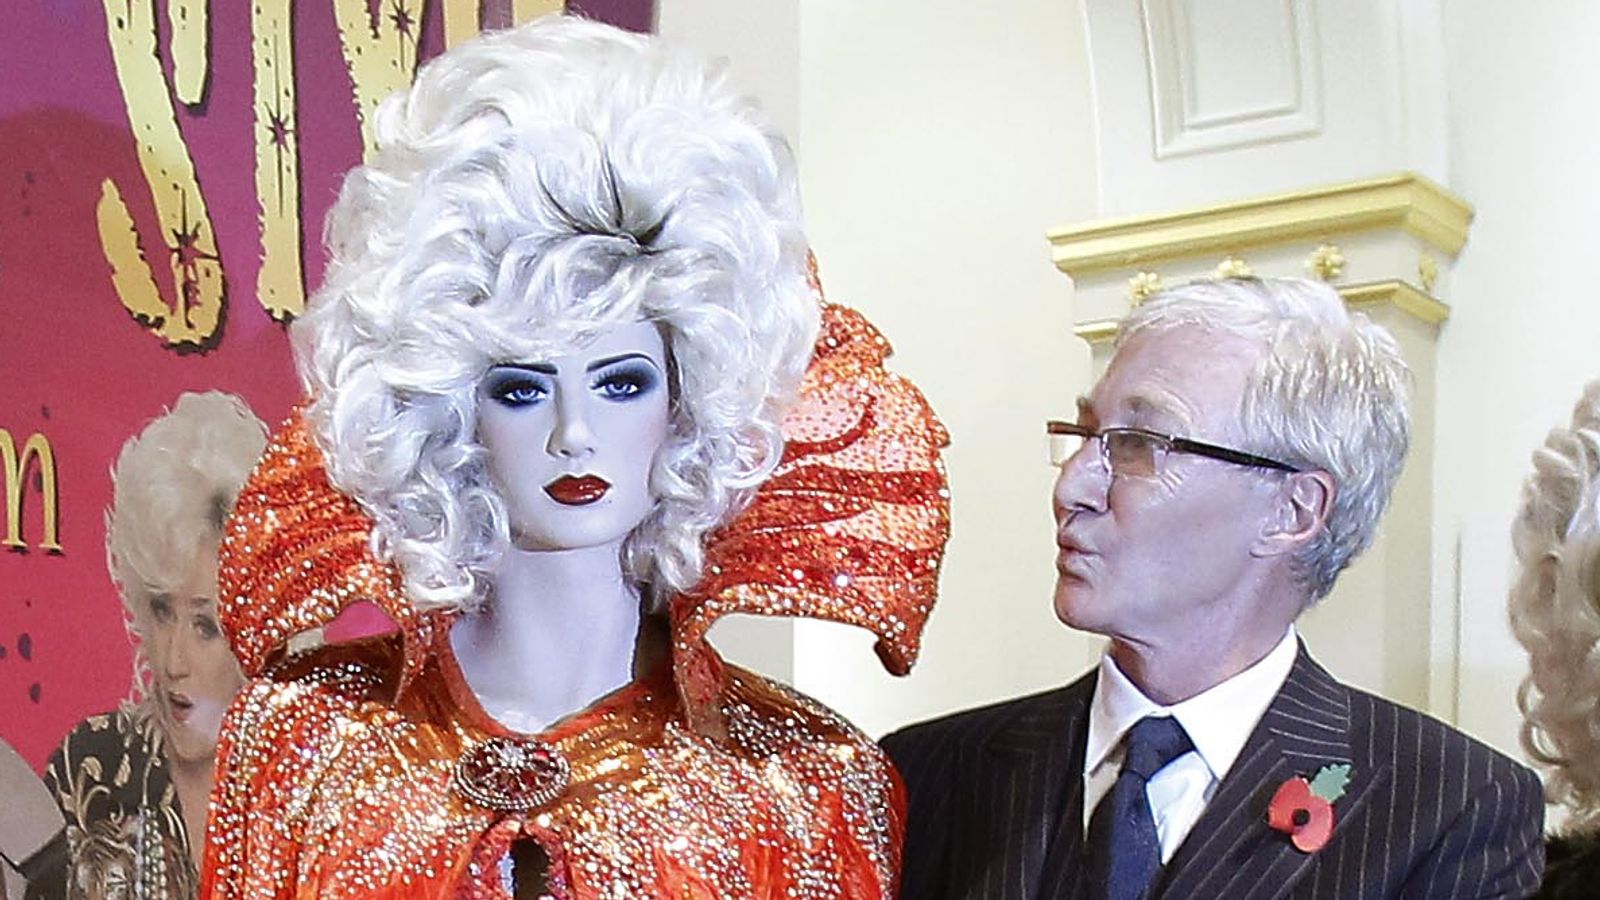 Paul O'Grady death: Tributes for 'really special' comedian and TV presenter